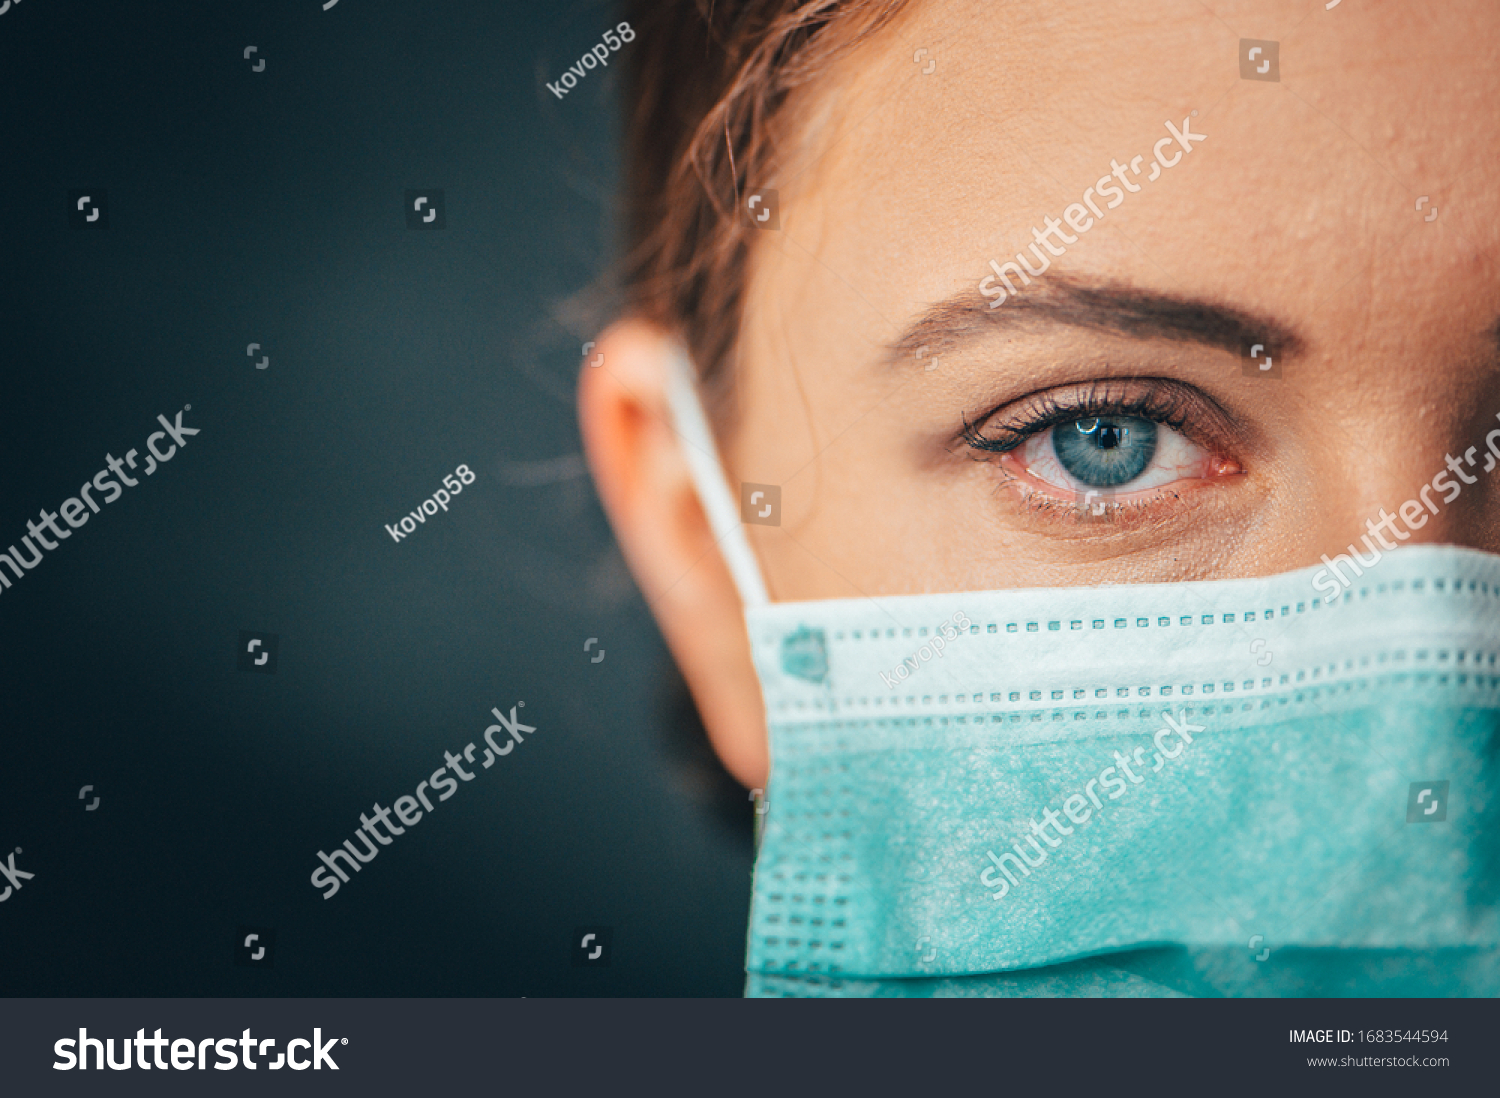 Close up portrait photo, Eye of Yong Female Doctor. Protection against contagious disease, coronavirus, hygienic face surgical medical mask to prevent infection. Black background #1683544594